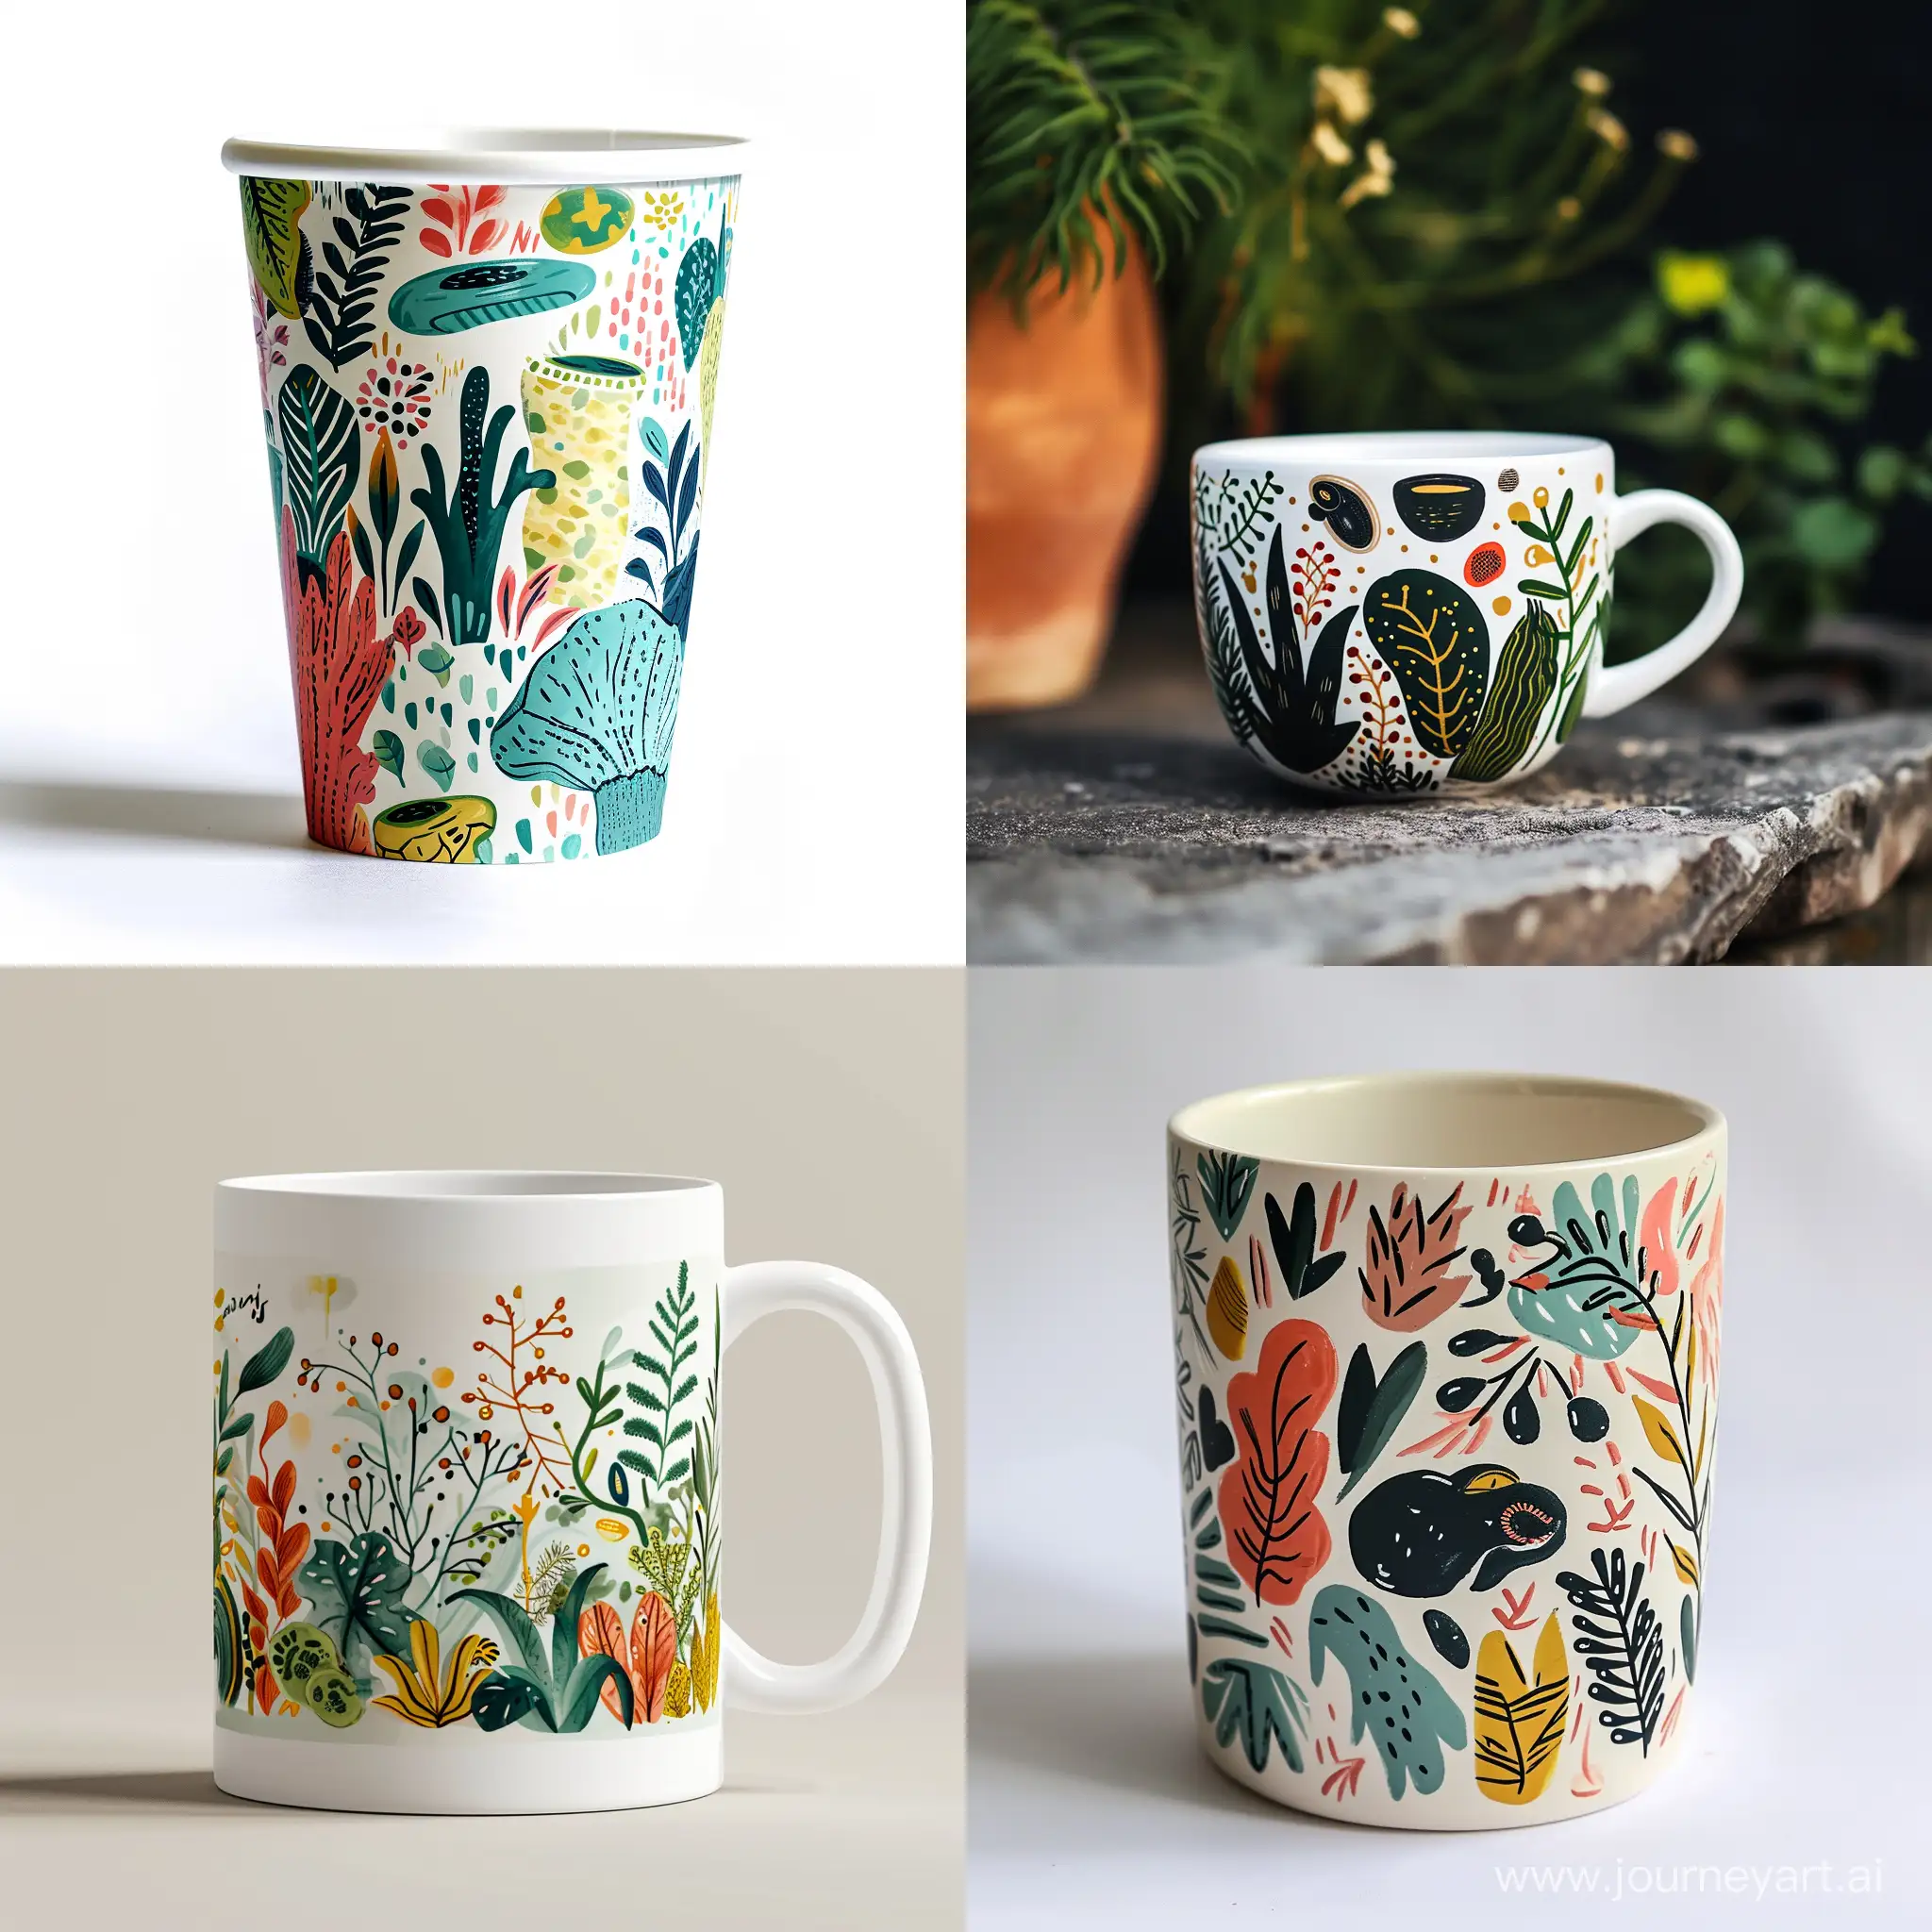 500 ml coffee cup with art on the theme of coffee, plants, aliens, illustration style